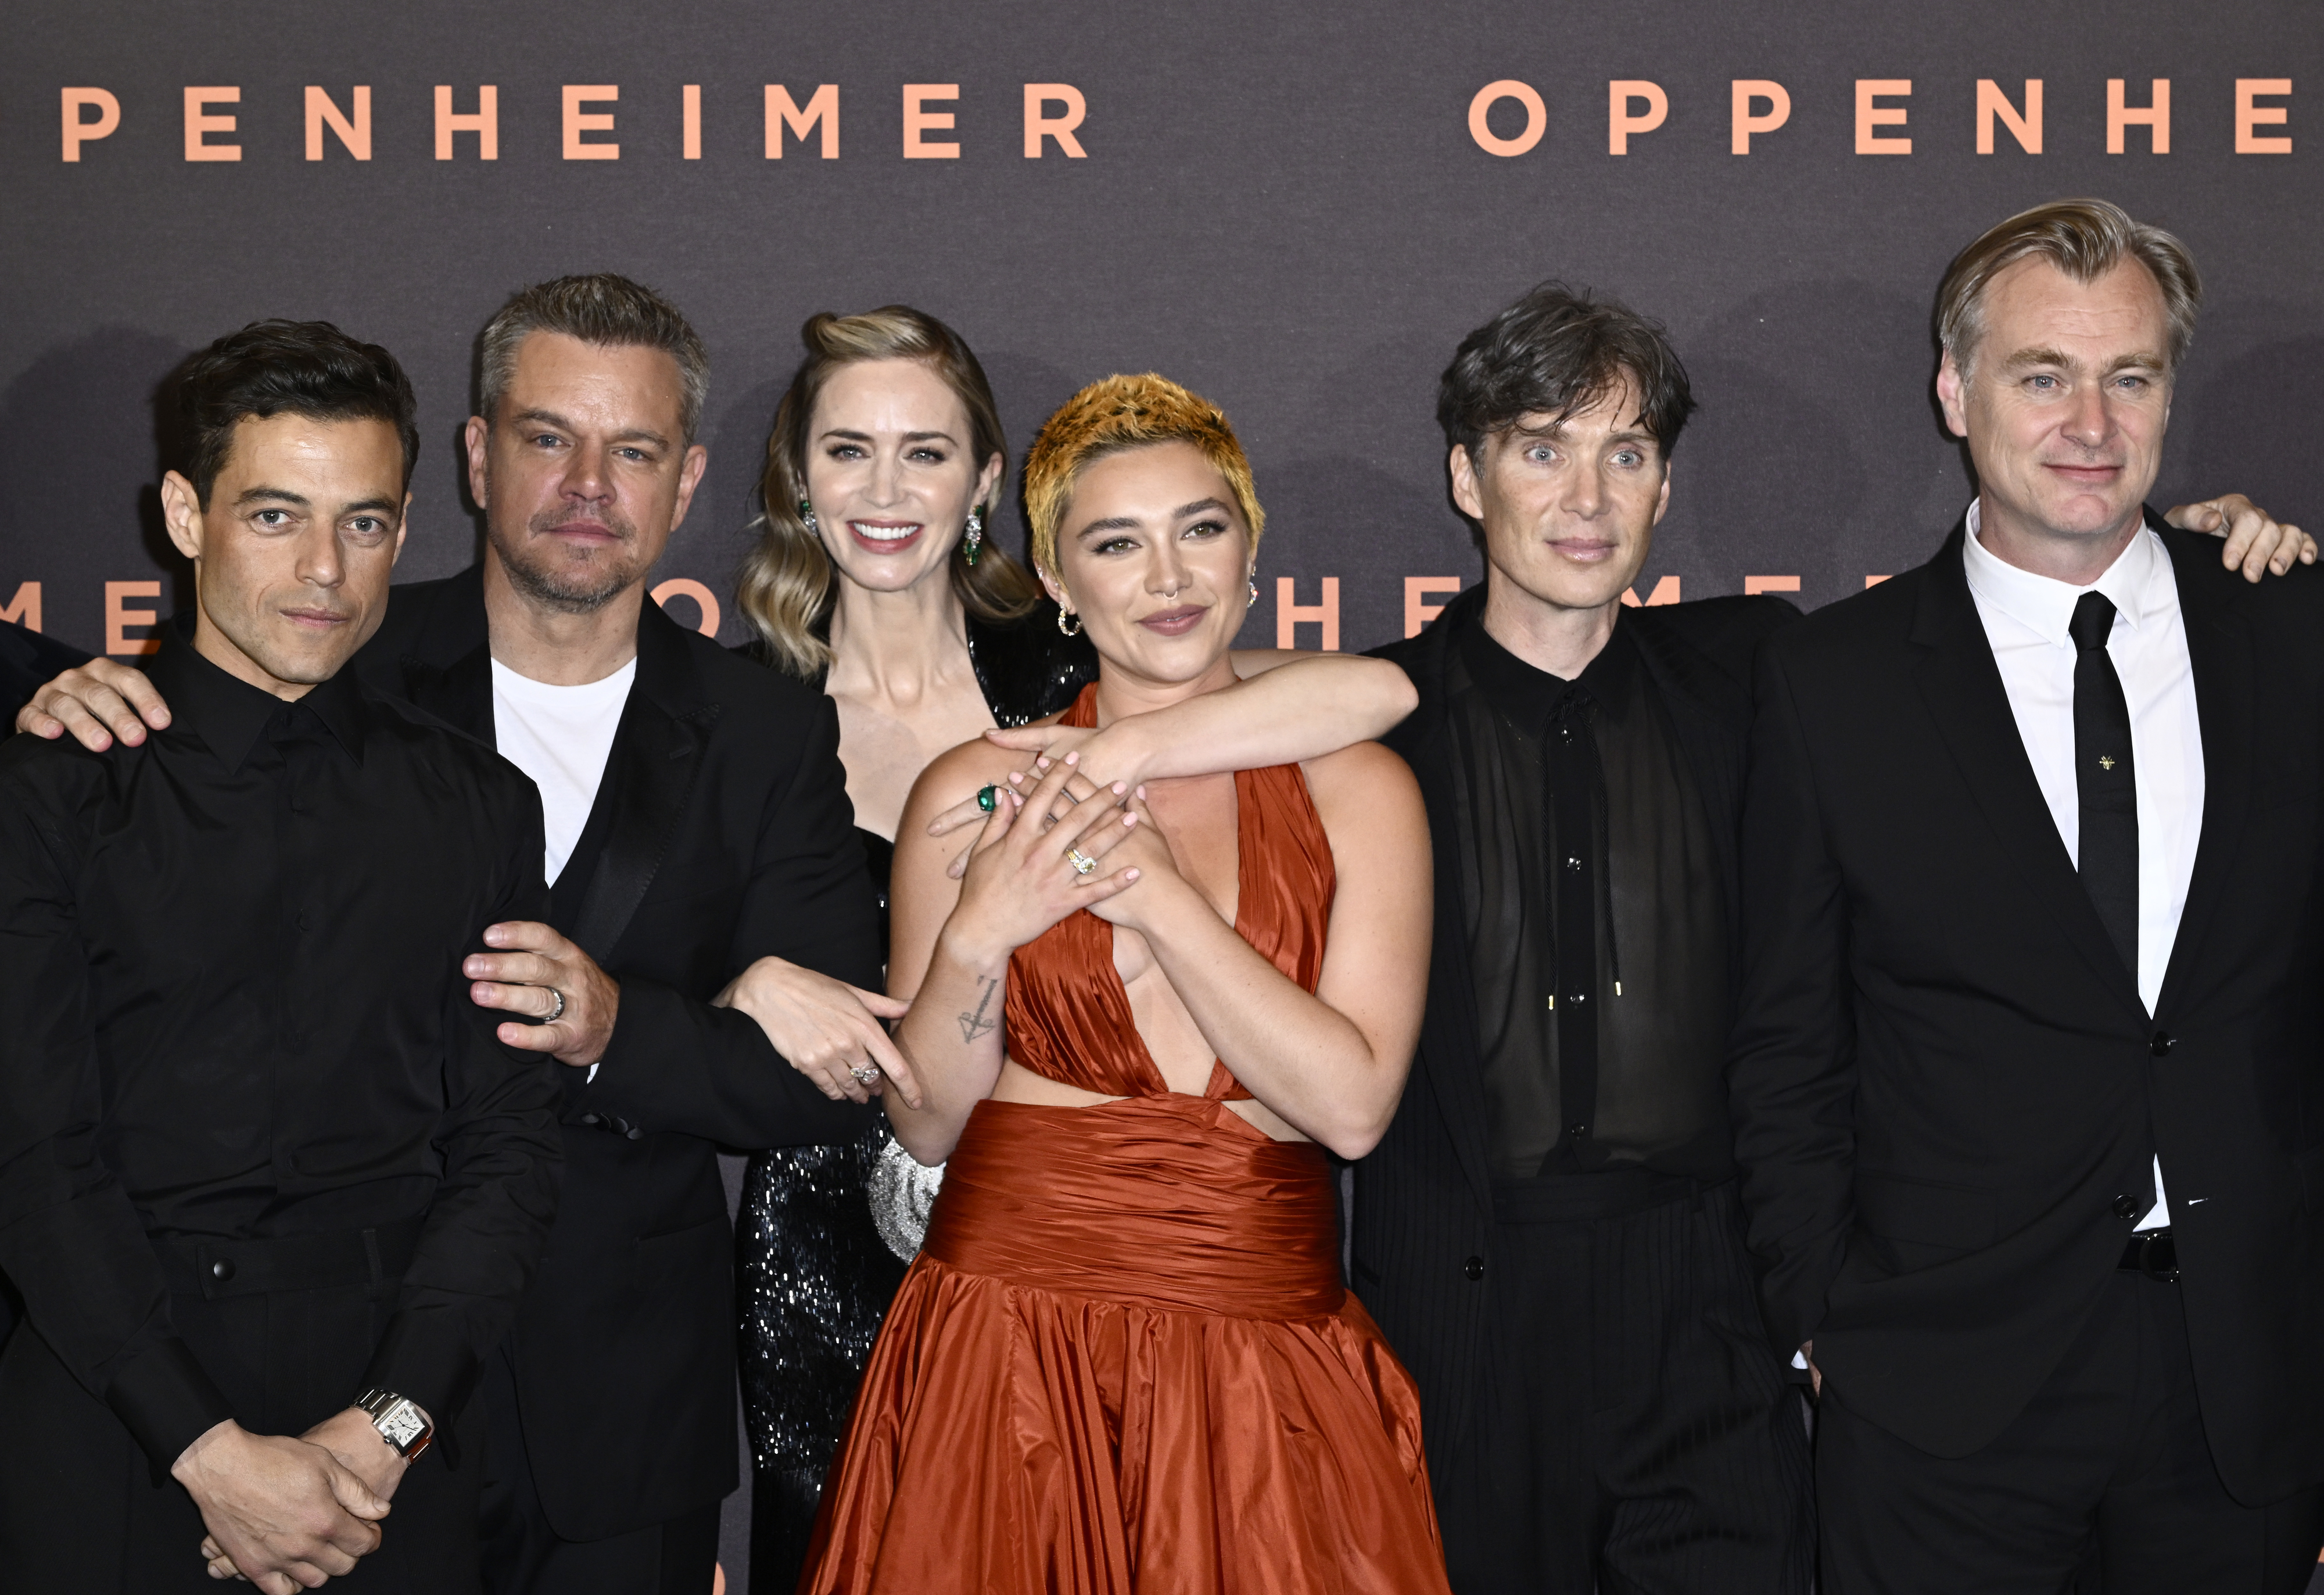 Close-up of Oppenheimer cast members with Christopher at a media event